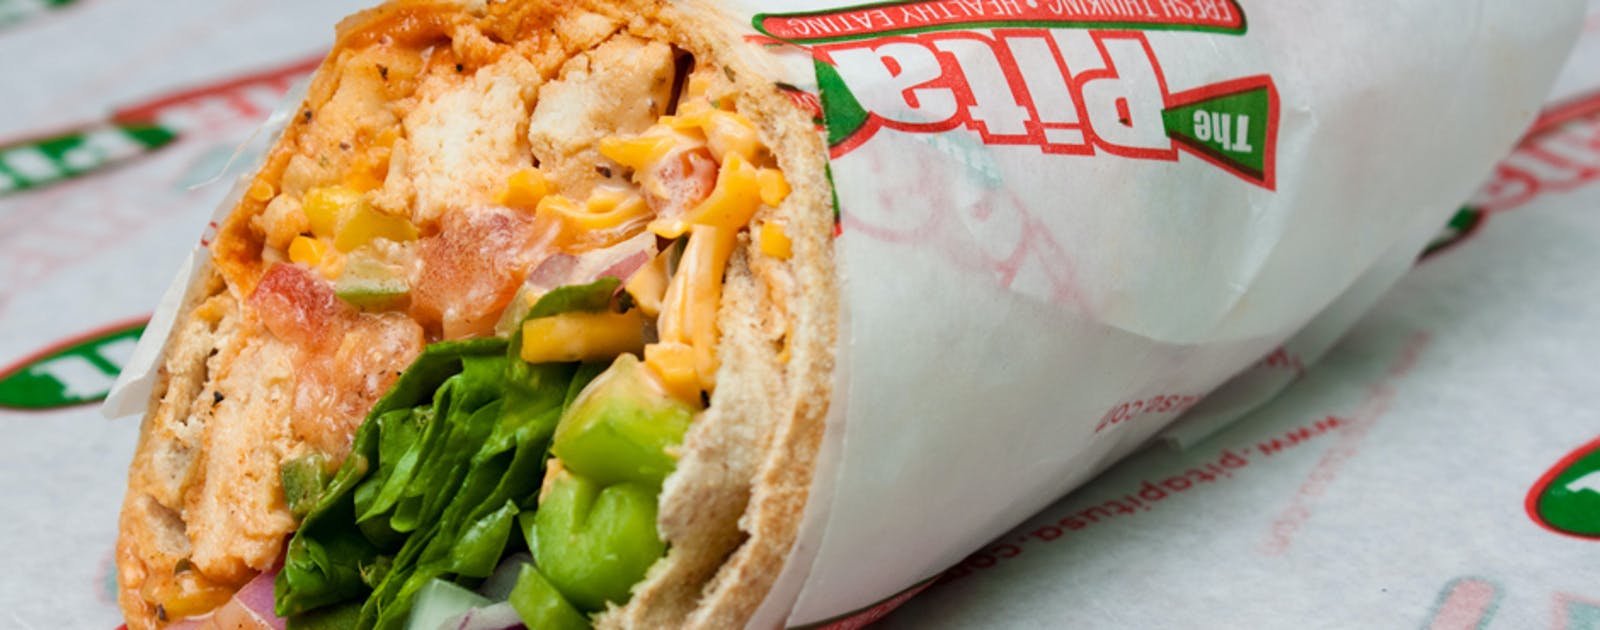 Pita Pit - Manly - Broome Tourism